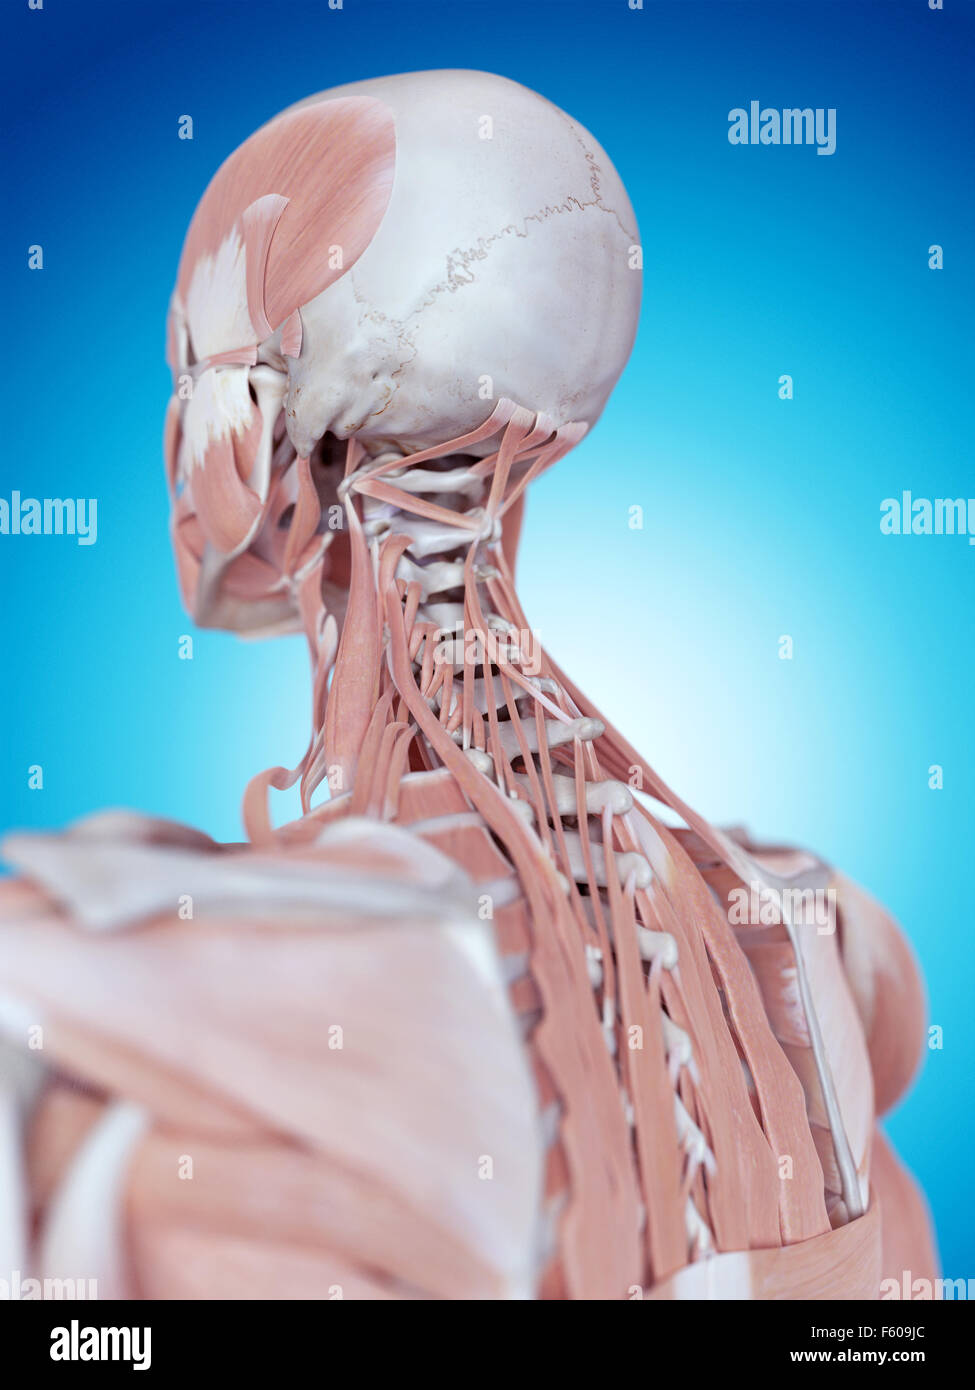 medically accurate illustration of the neck anatomy Stock Photo